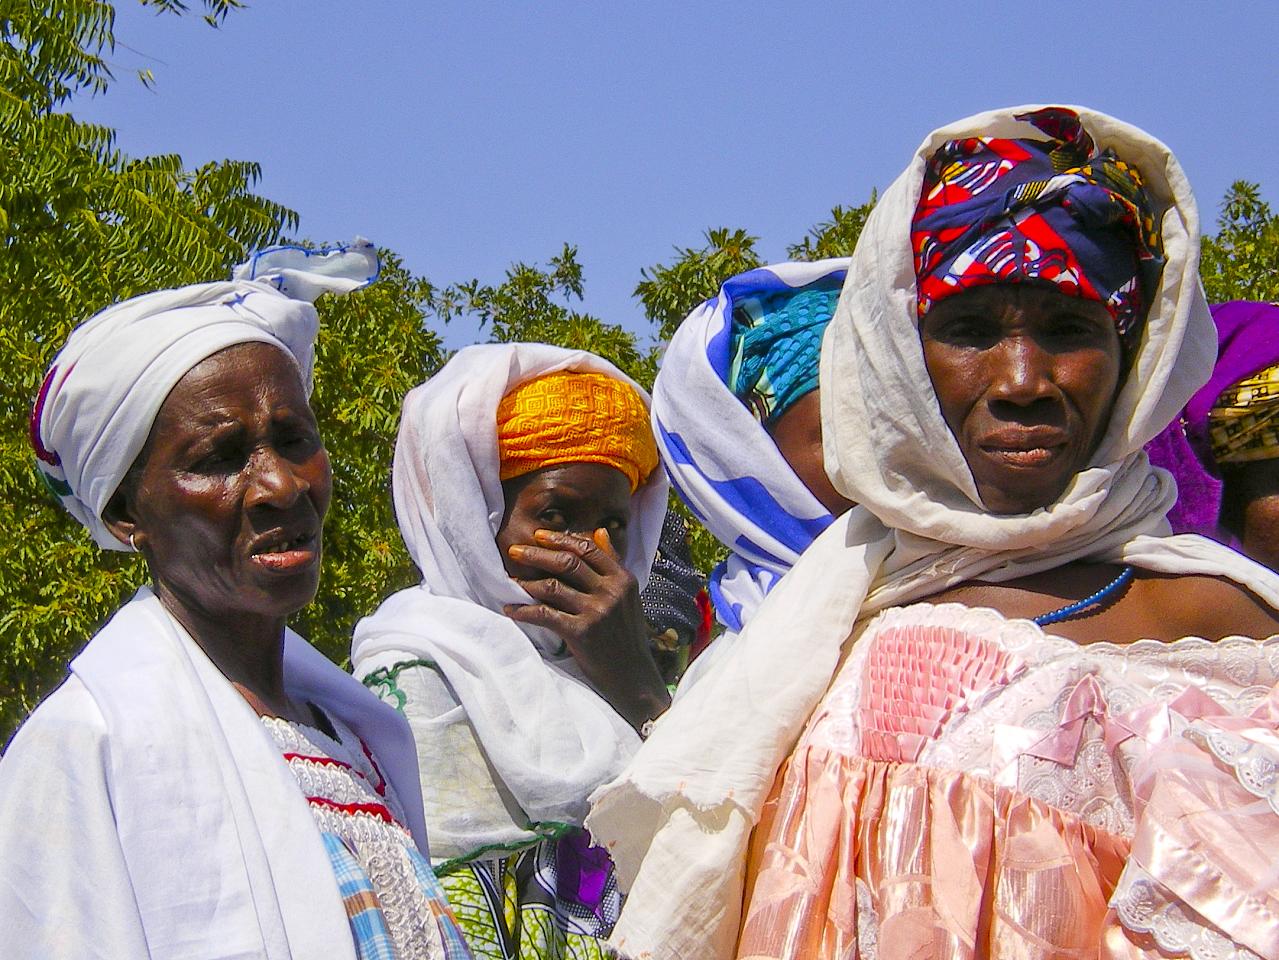 three women in colorful cloths and headscarves stand together